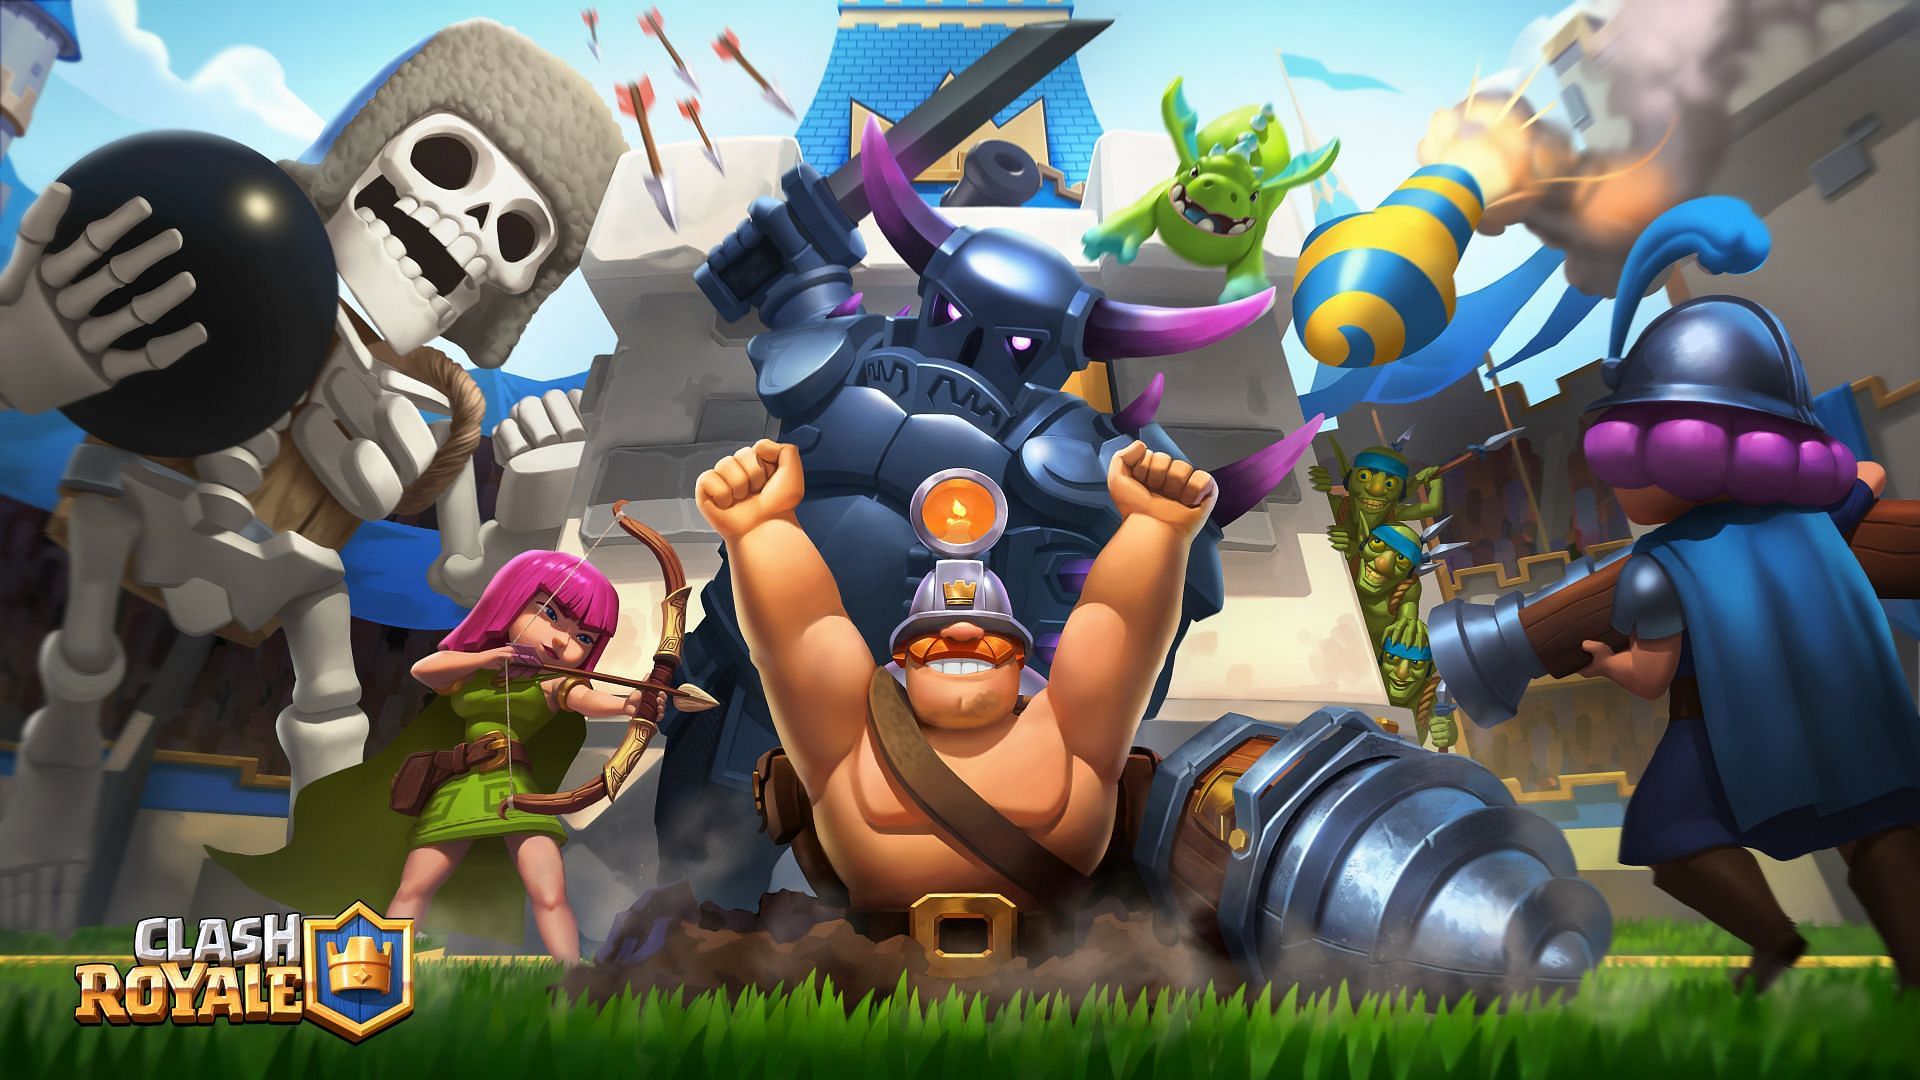 Clan names in Clash Royale